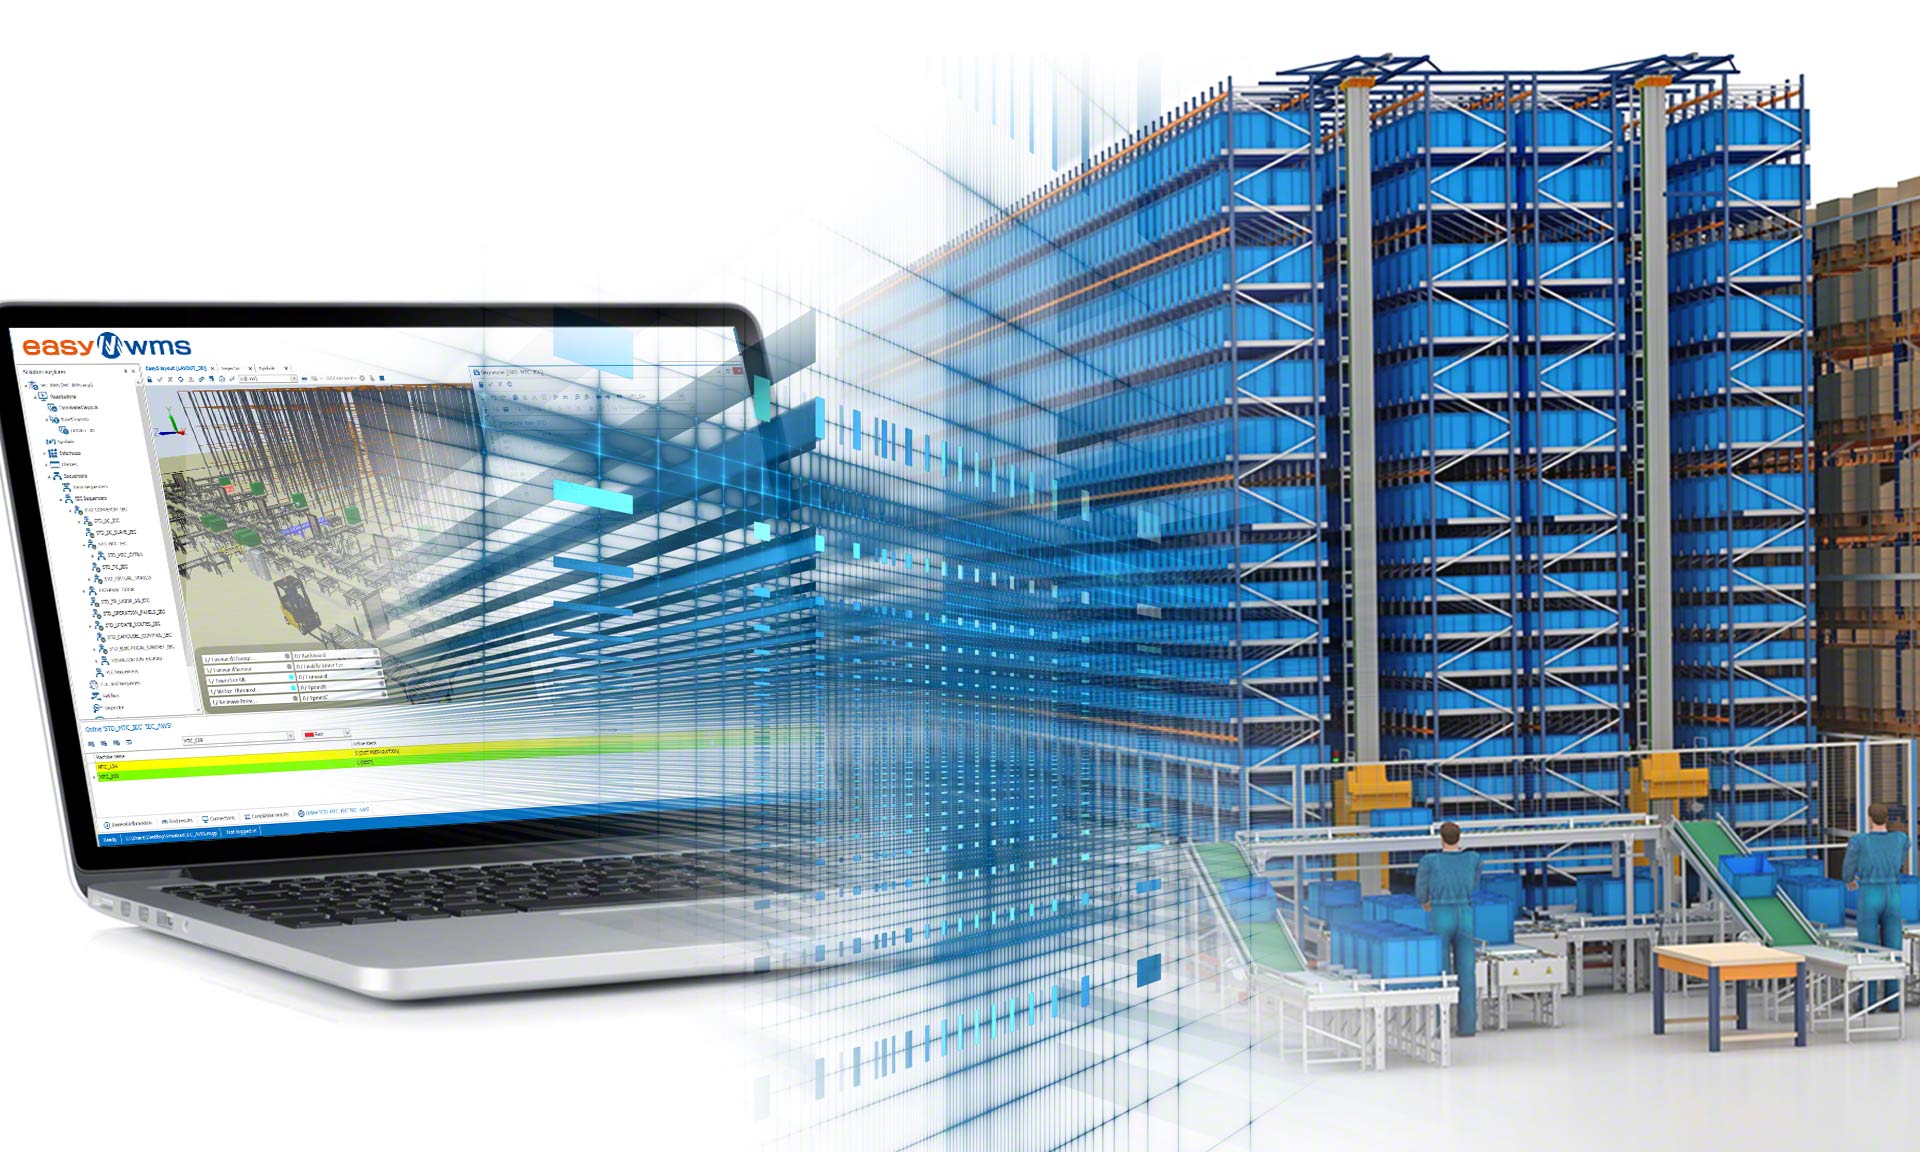 Warehouse layout optimization is fundamental for enabling companies to cope with market changes